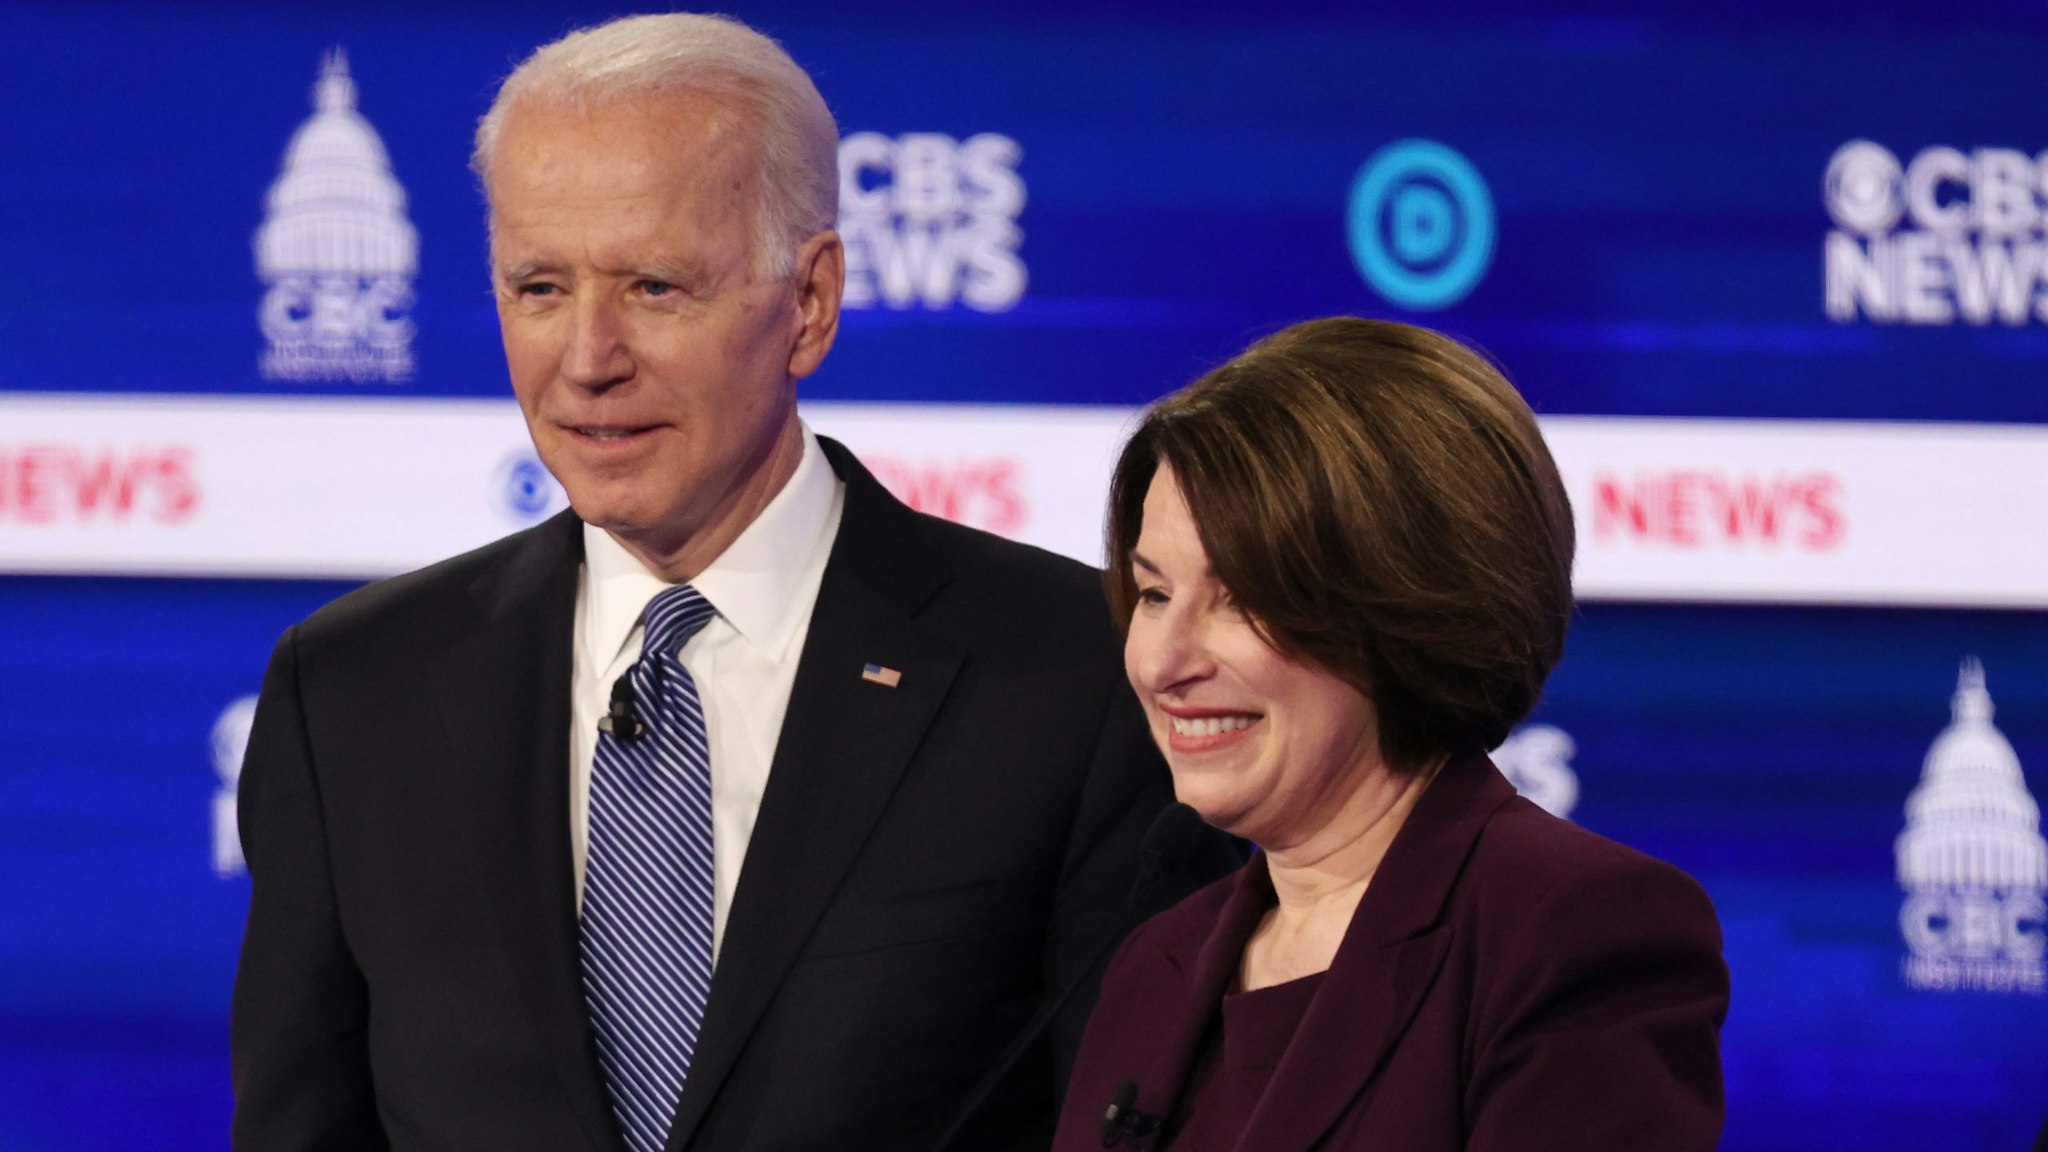 CHARLESTON, SOUTH CAROLINA - FEBRUARY 25: Democratic presidential candidates former Vice President Joe Biden and Sen. Amy Klobuchar (D-MN) interact during a break at the Democratic presidential primary debate at the Charleston Gaillard Center on February 25, 2020 in Charleston, South Carolina. Seven candidates qualified for the debate, hosted by CBS News and Congressional Black Caucus Institute, ahead of South Carolina’s primary in four days. (Photo by Win McNamee/Getty Images)